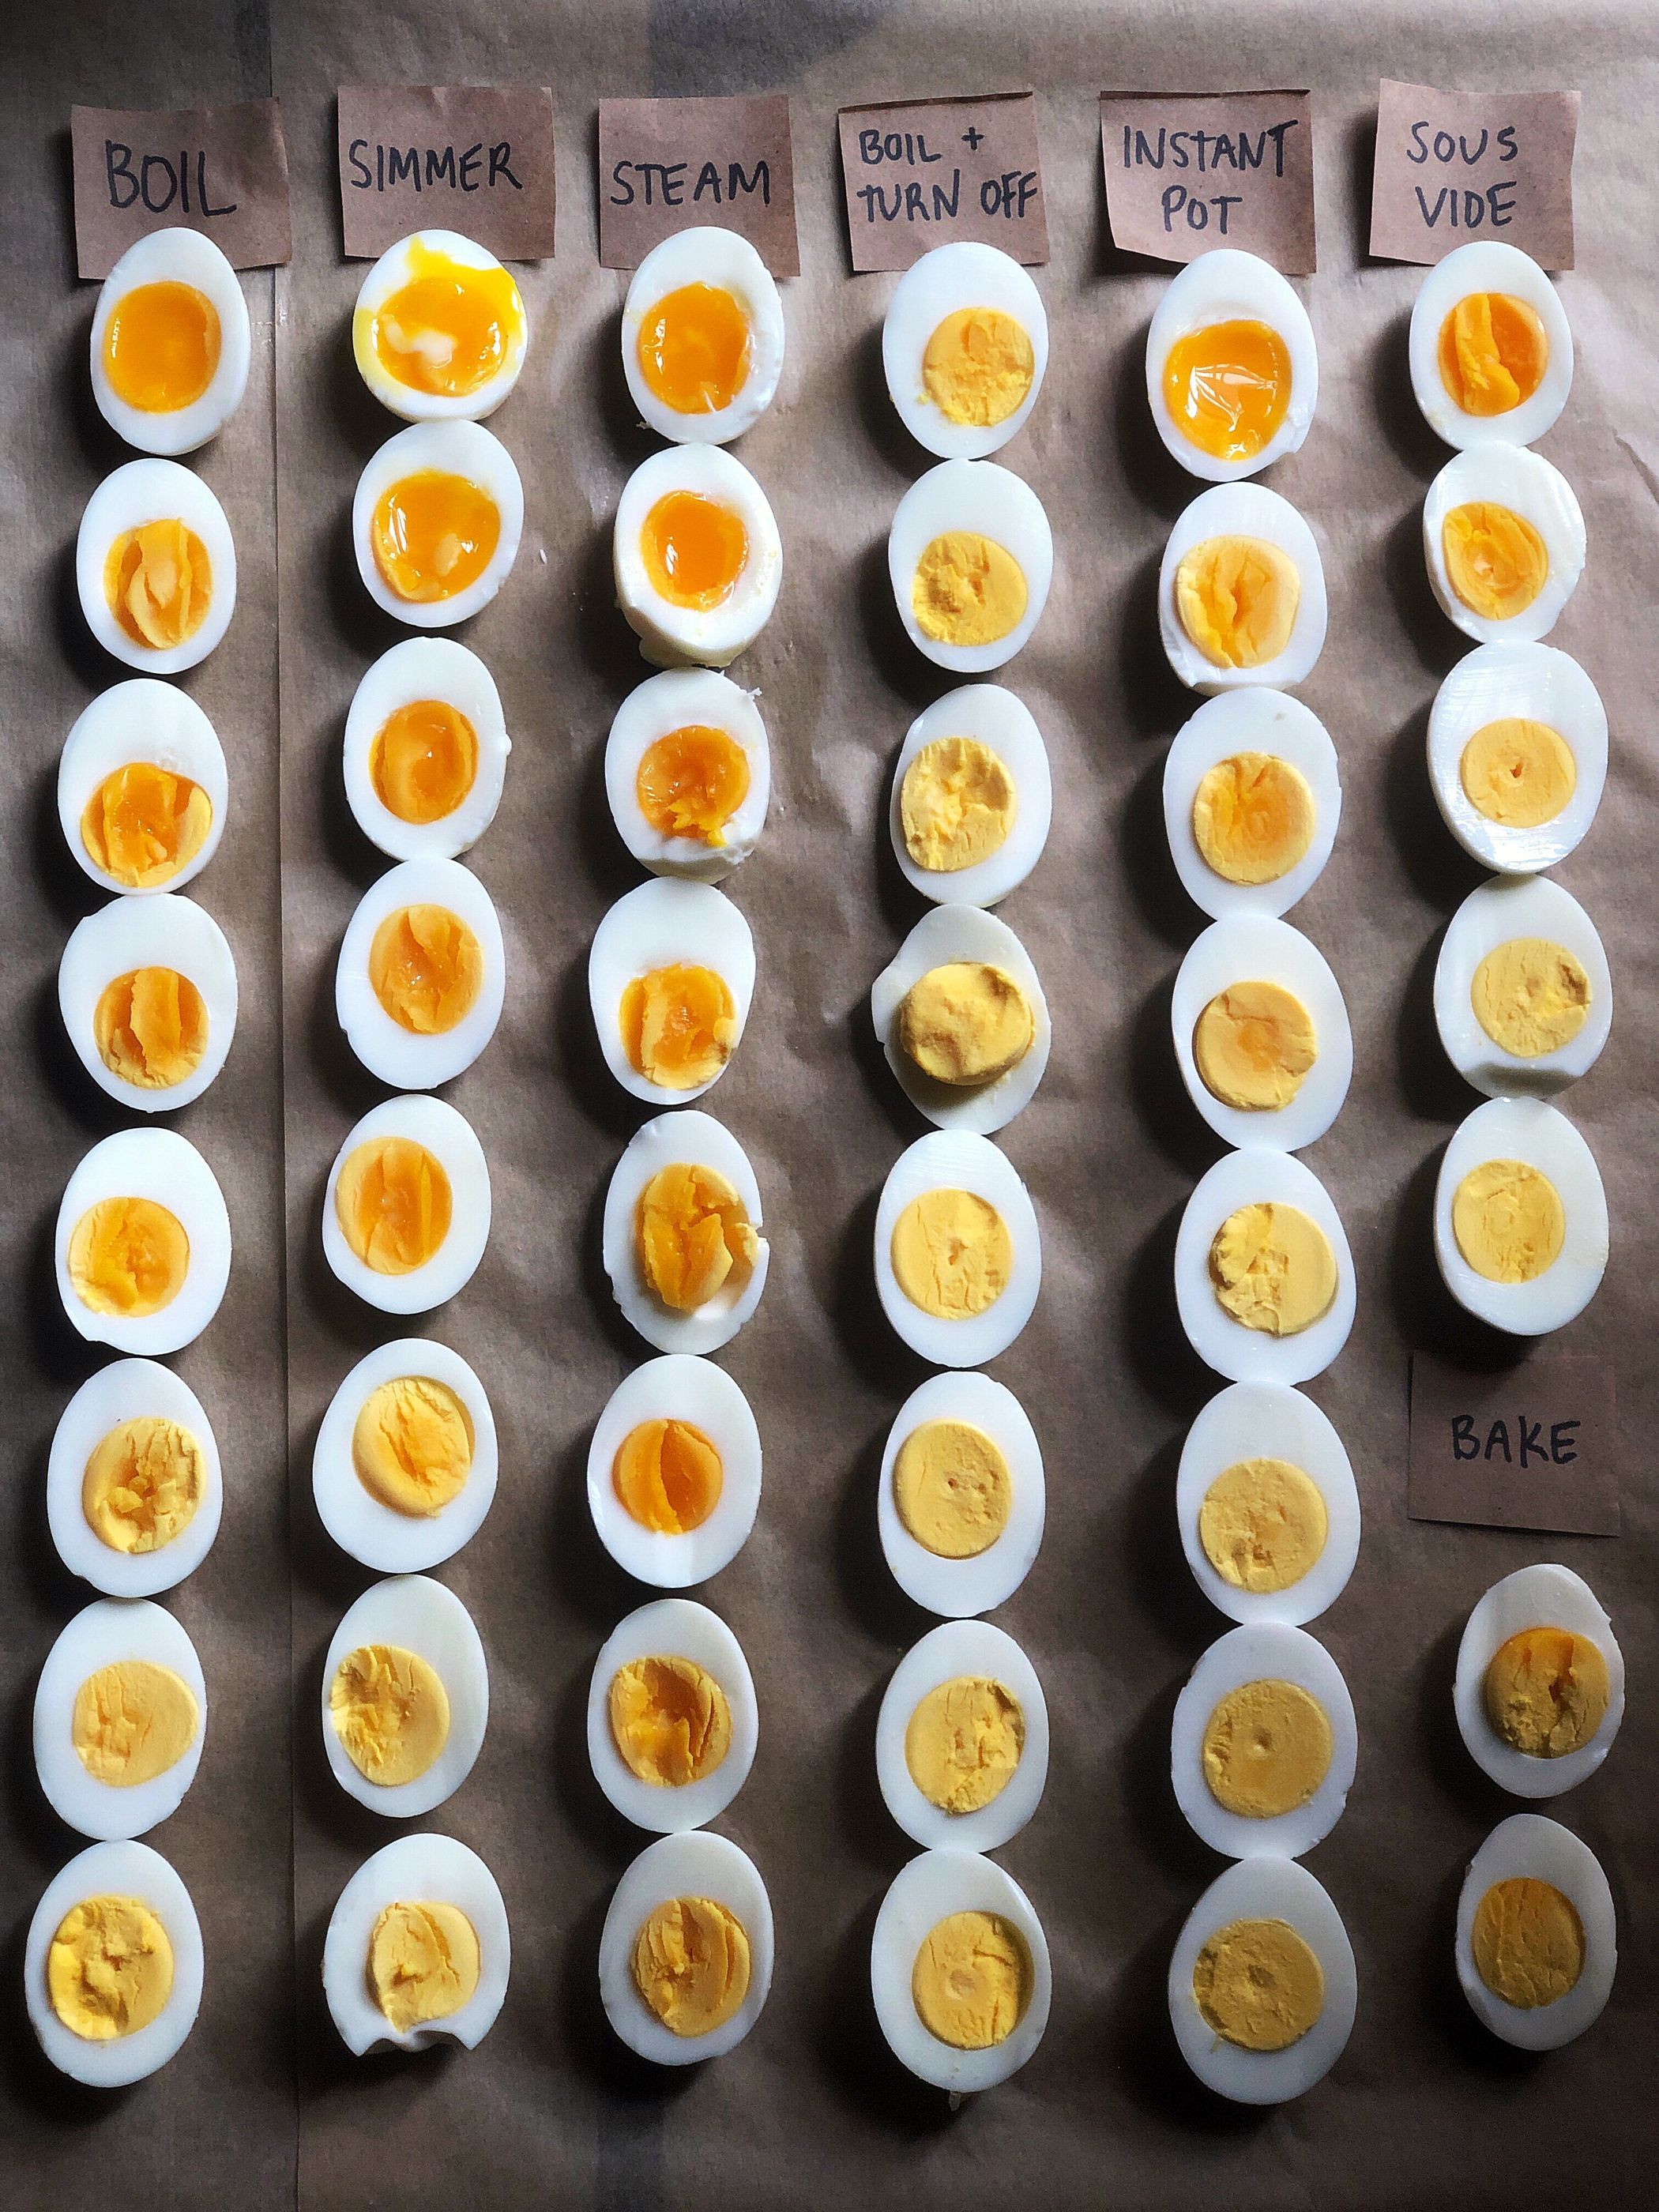 The Absolute Best Way to Boil Eggs, According to So Many Tests